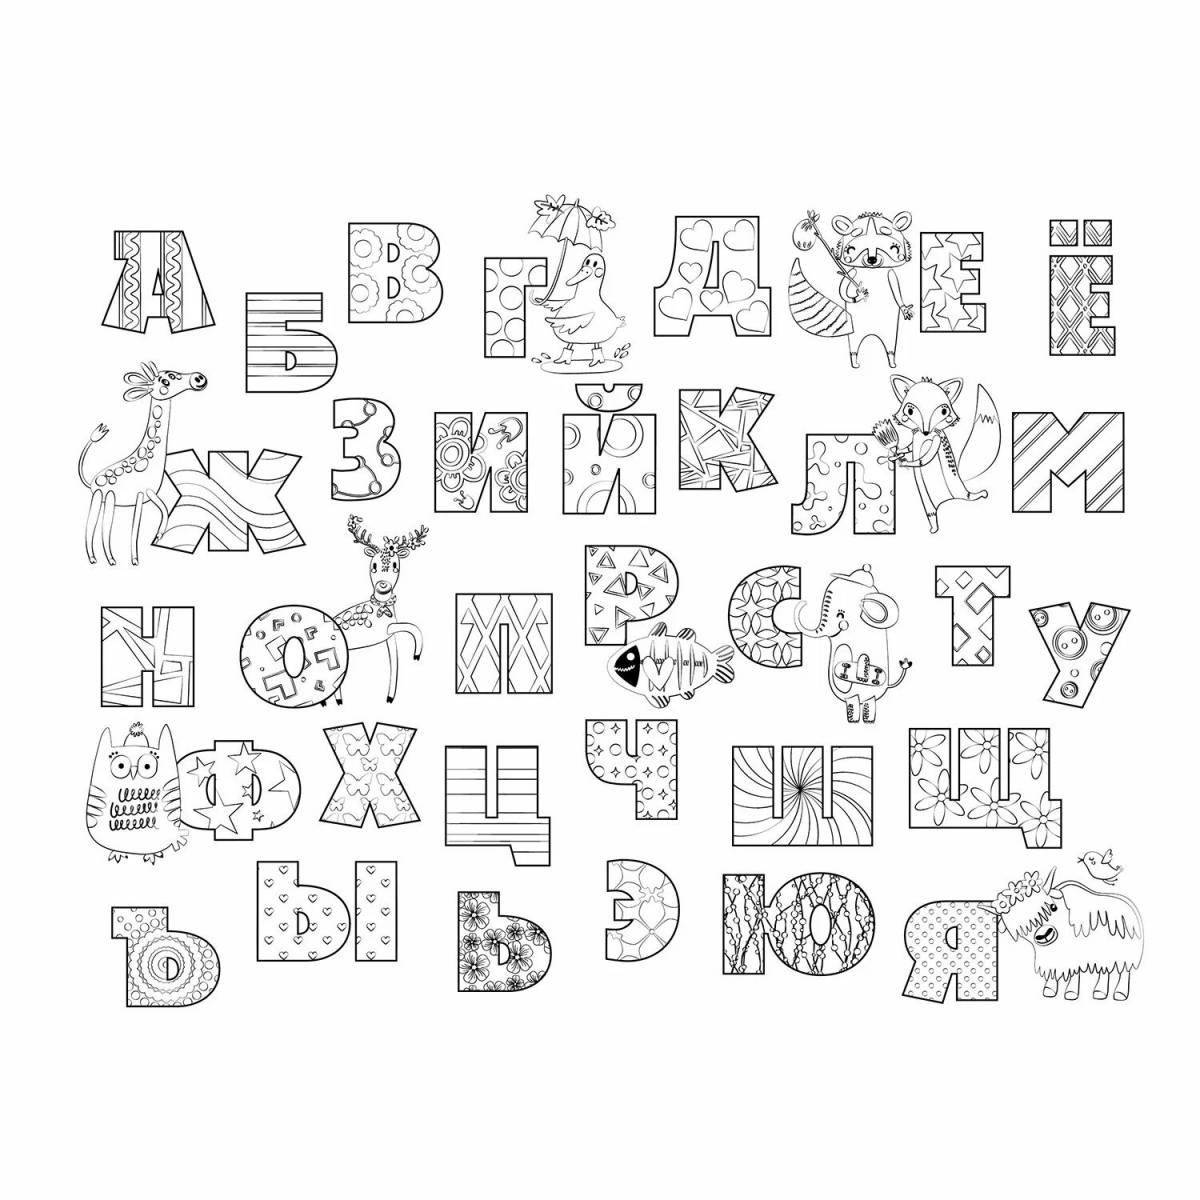 Animated Russian alphabet coloring book